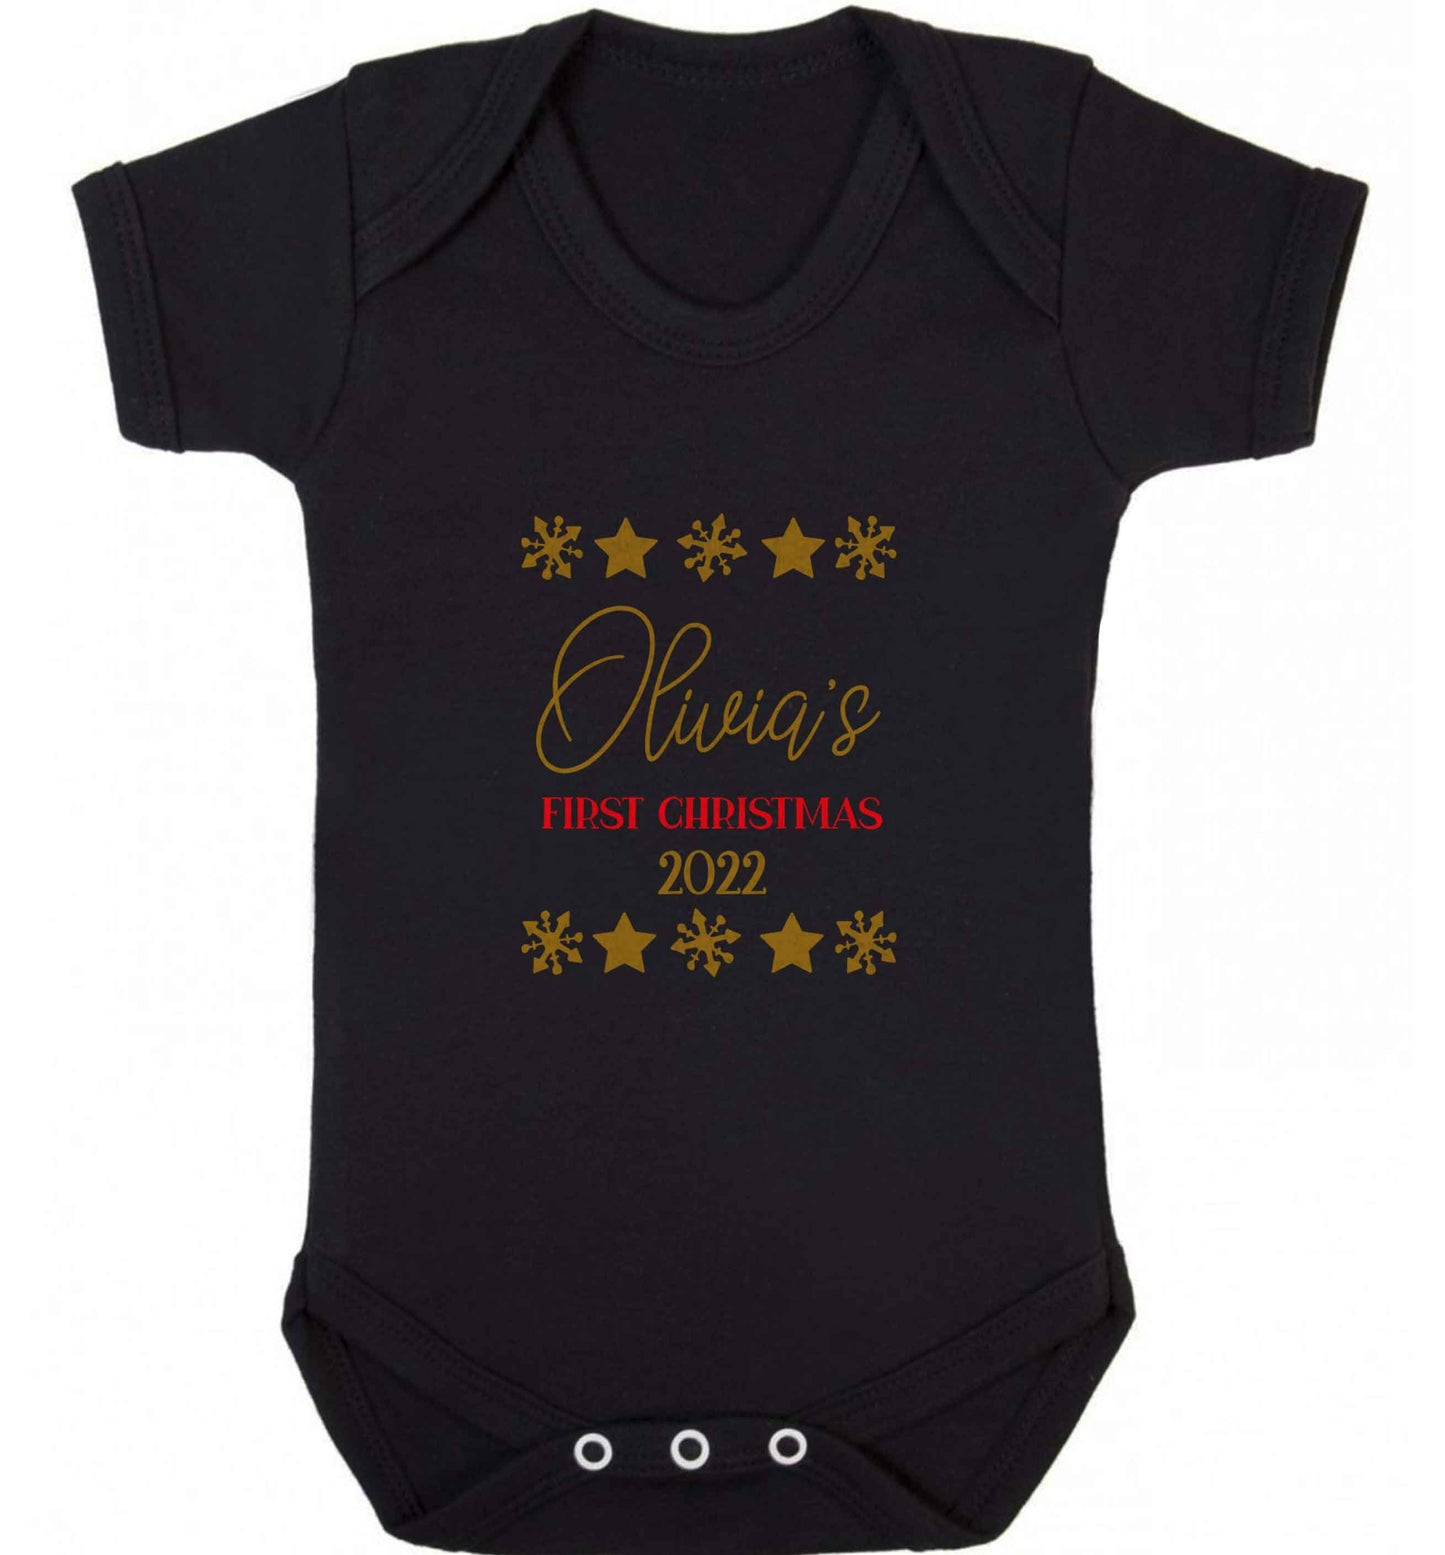 Personalised First Christmas baby vest black 18-24 months